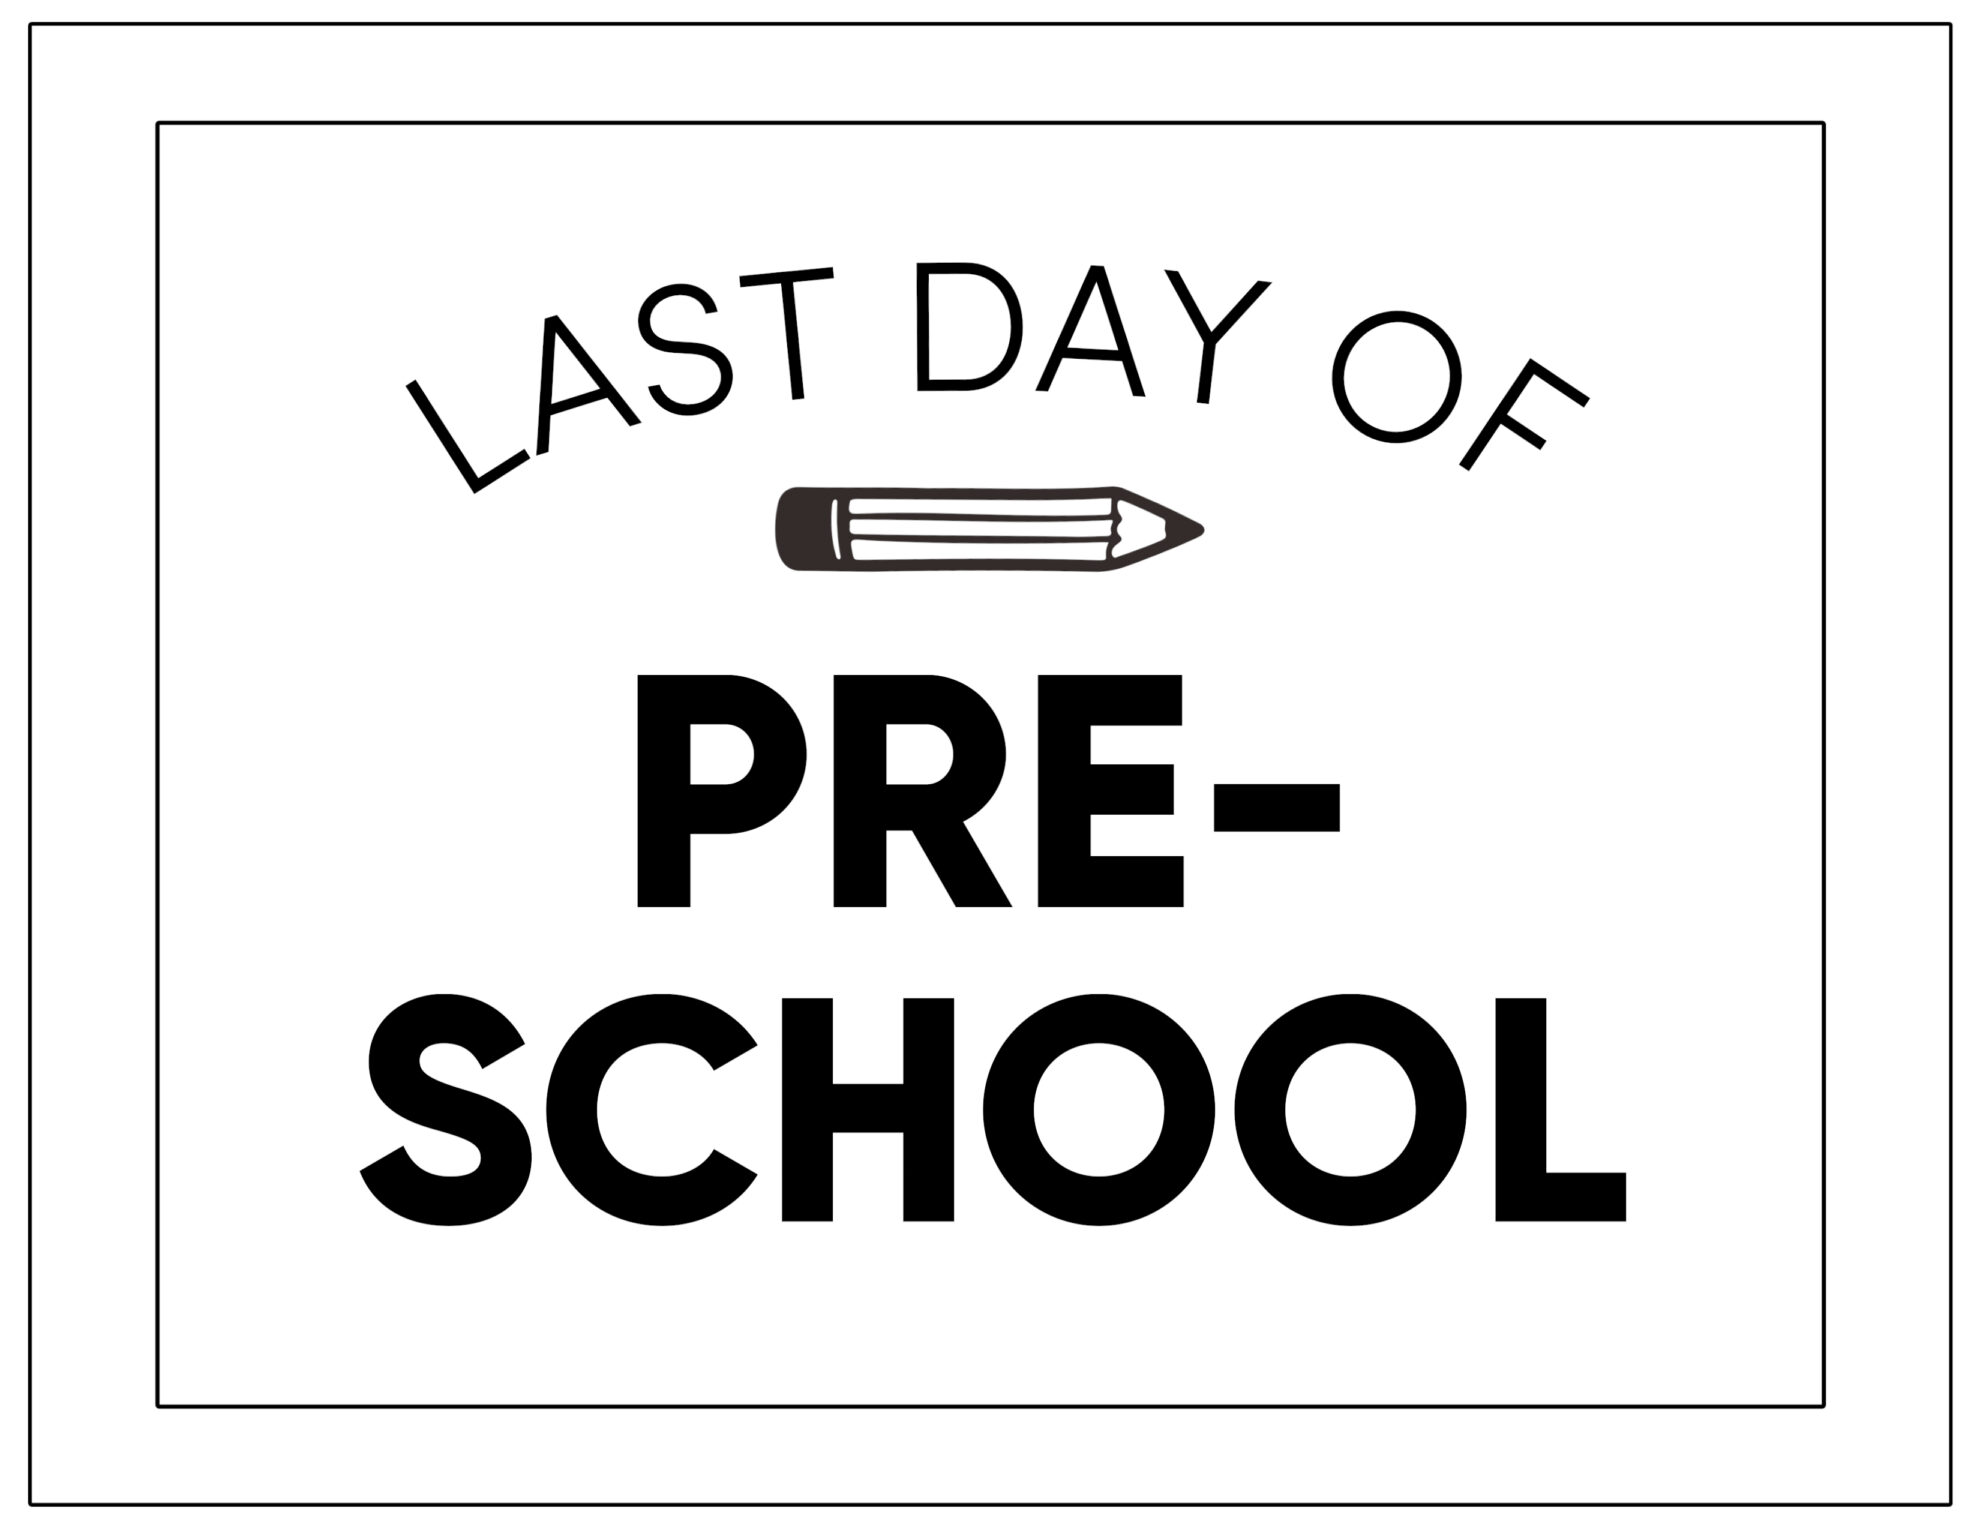 Printable Last Day of School Signs Paper Trail Design